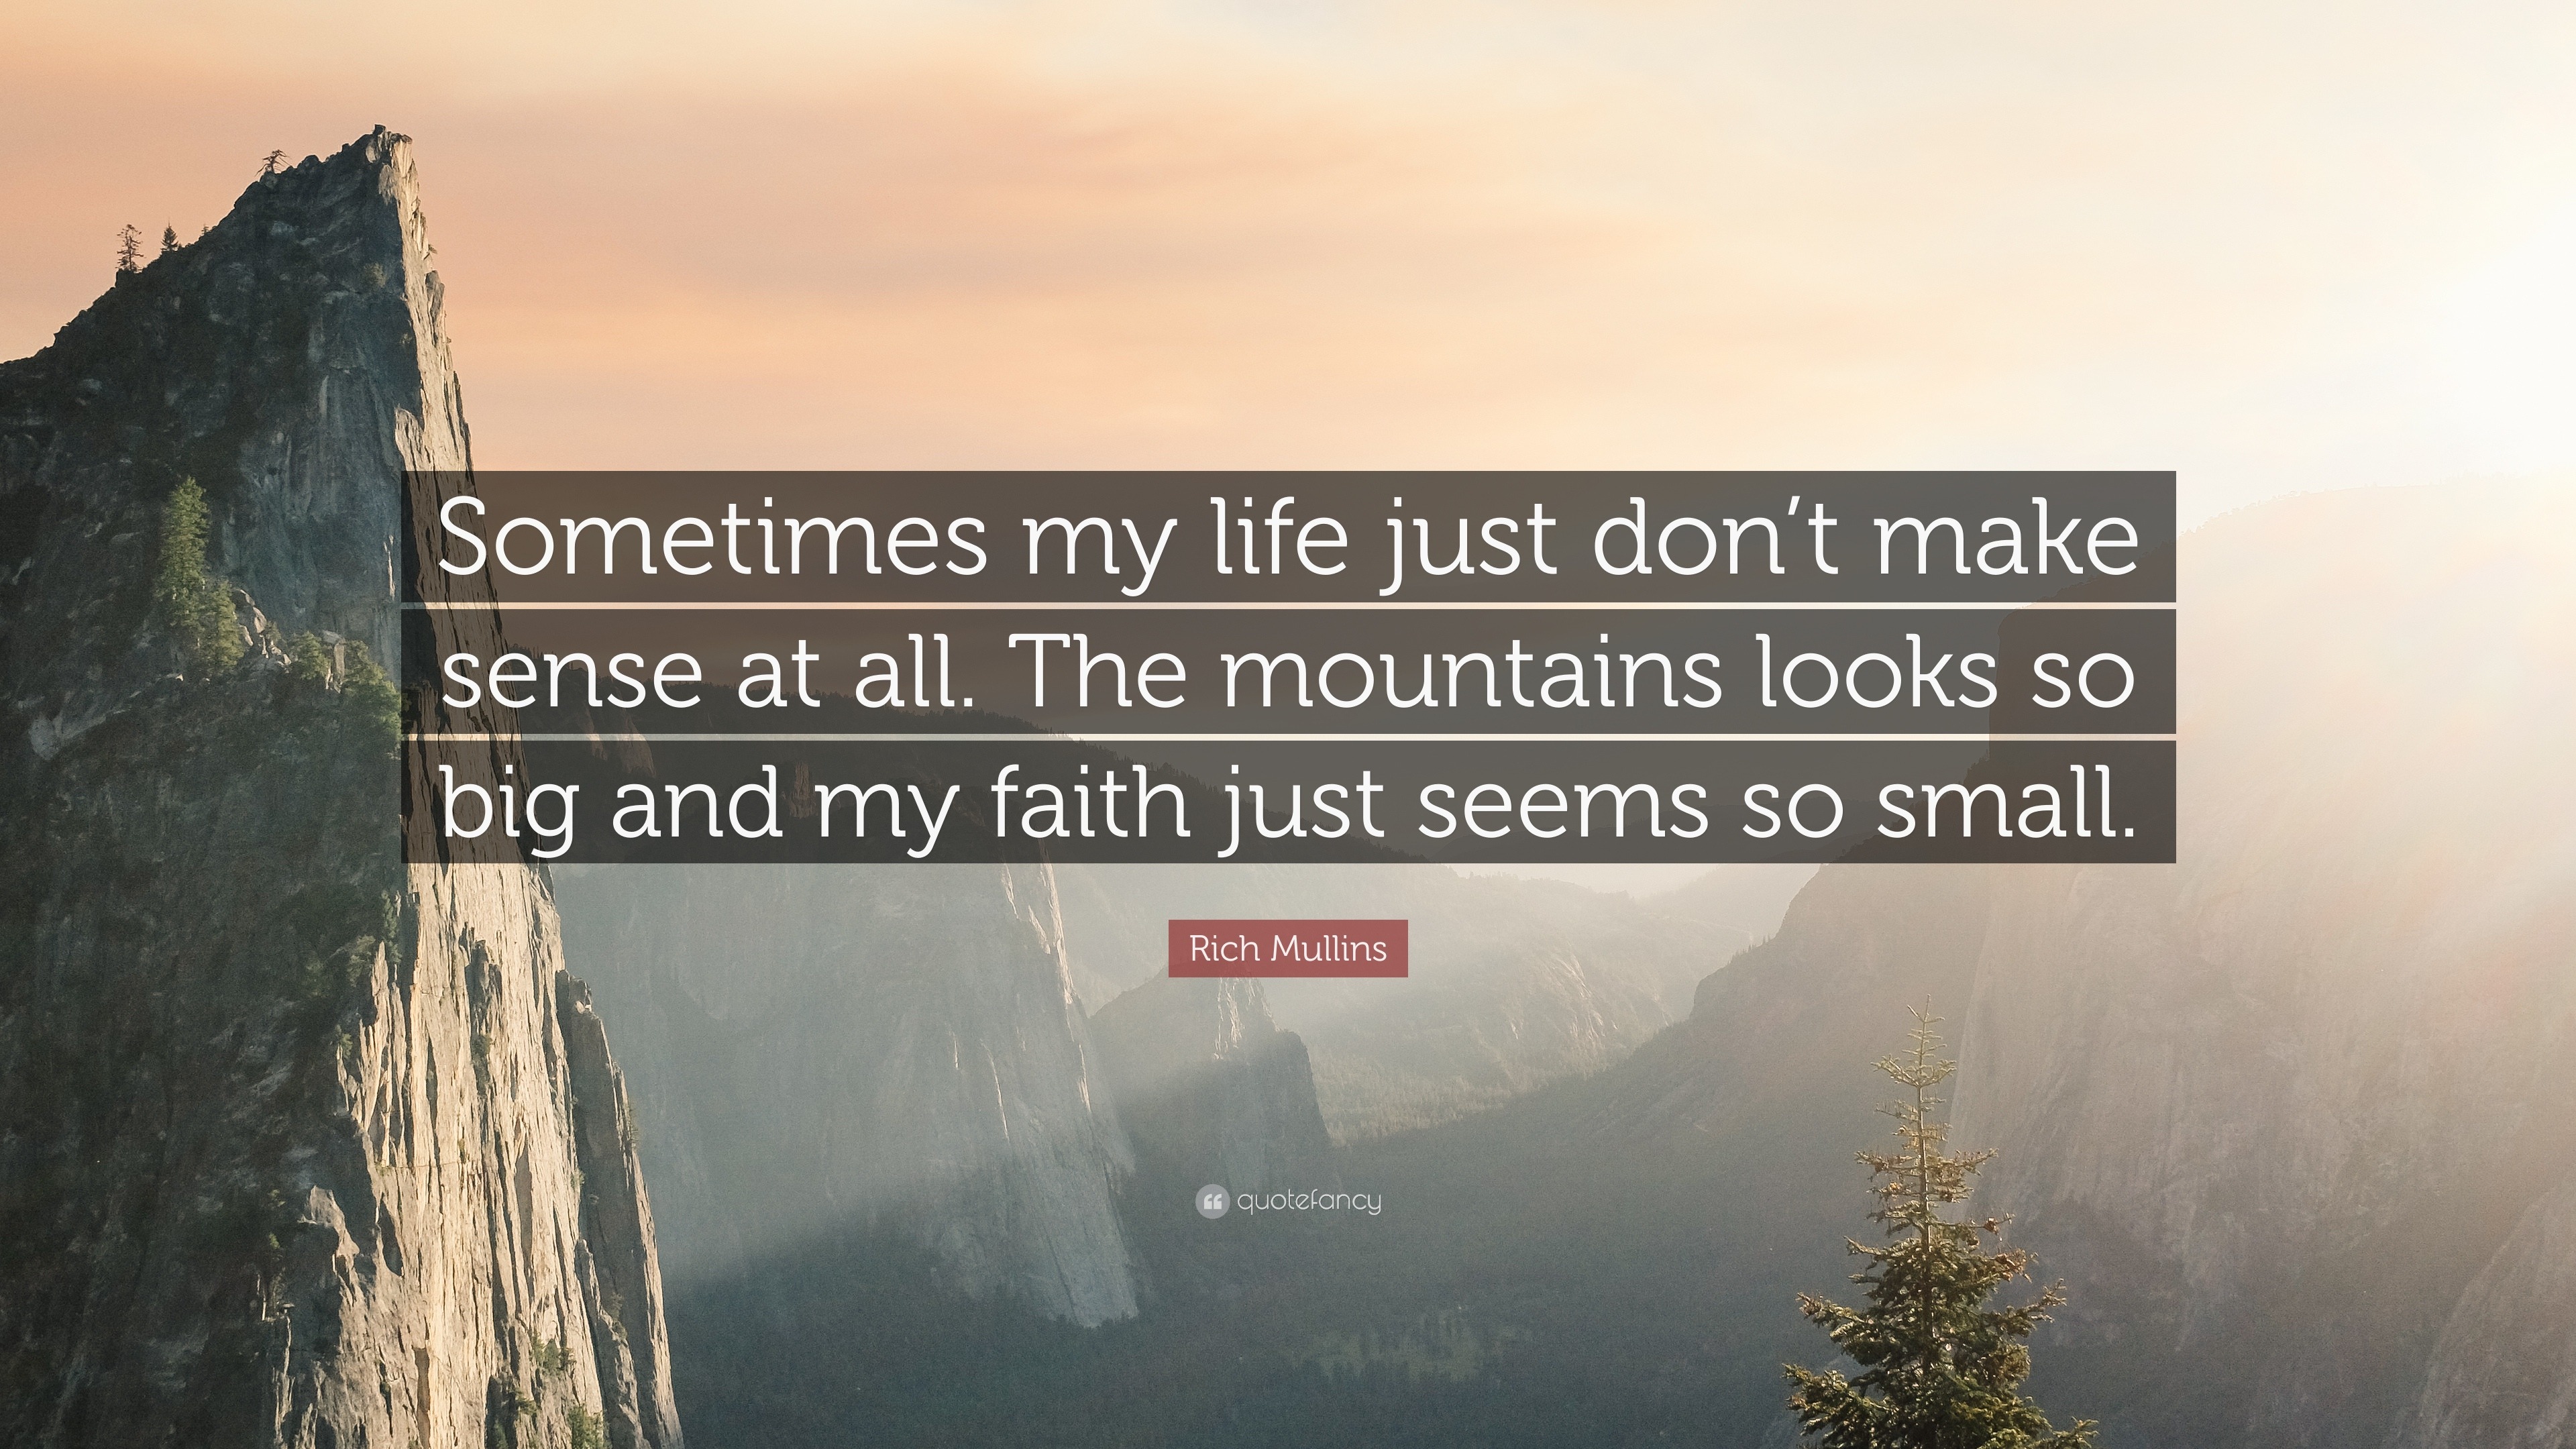 Rich Mullins Quote “Sometimes my life just don t make sense at all